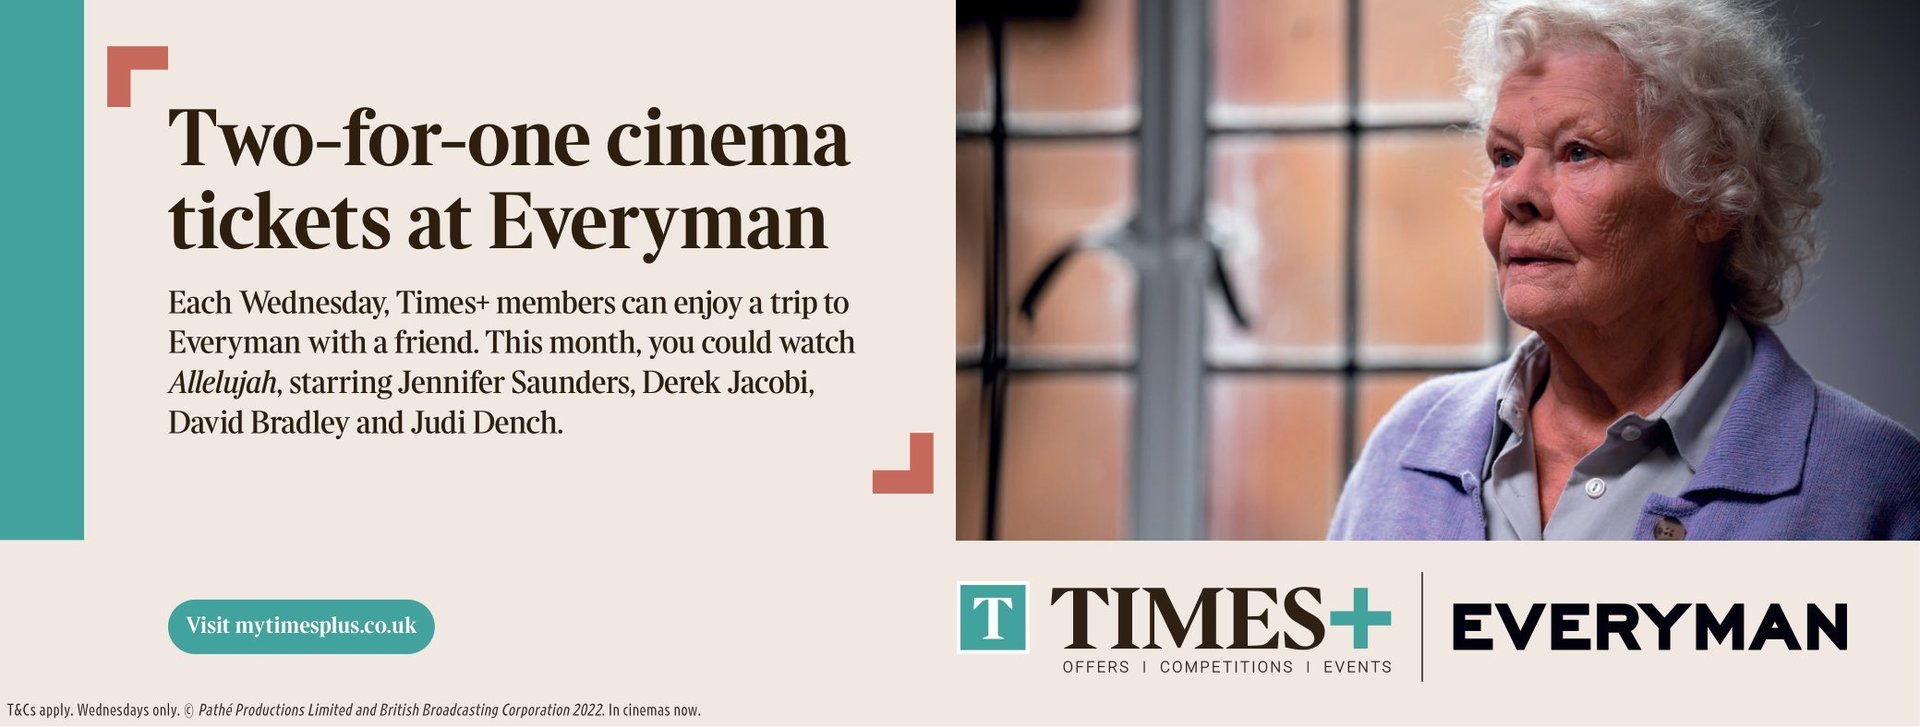 2 for 1 cinema tickets at Everyman with Times+